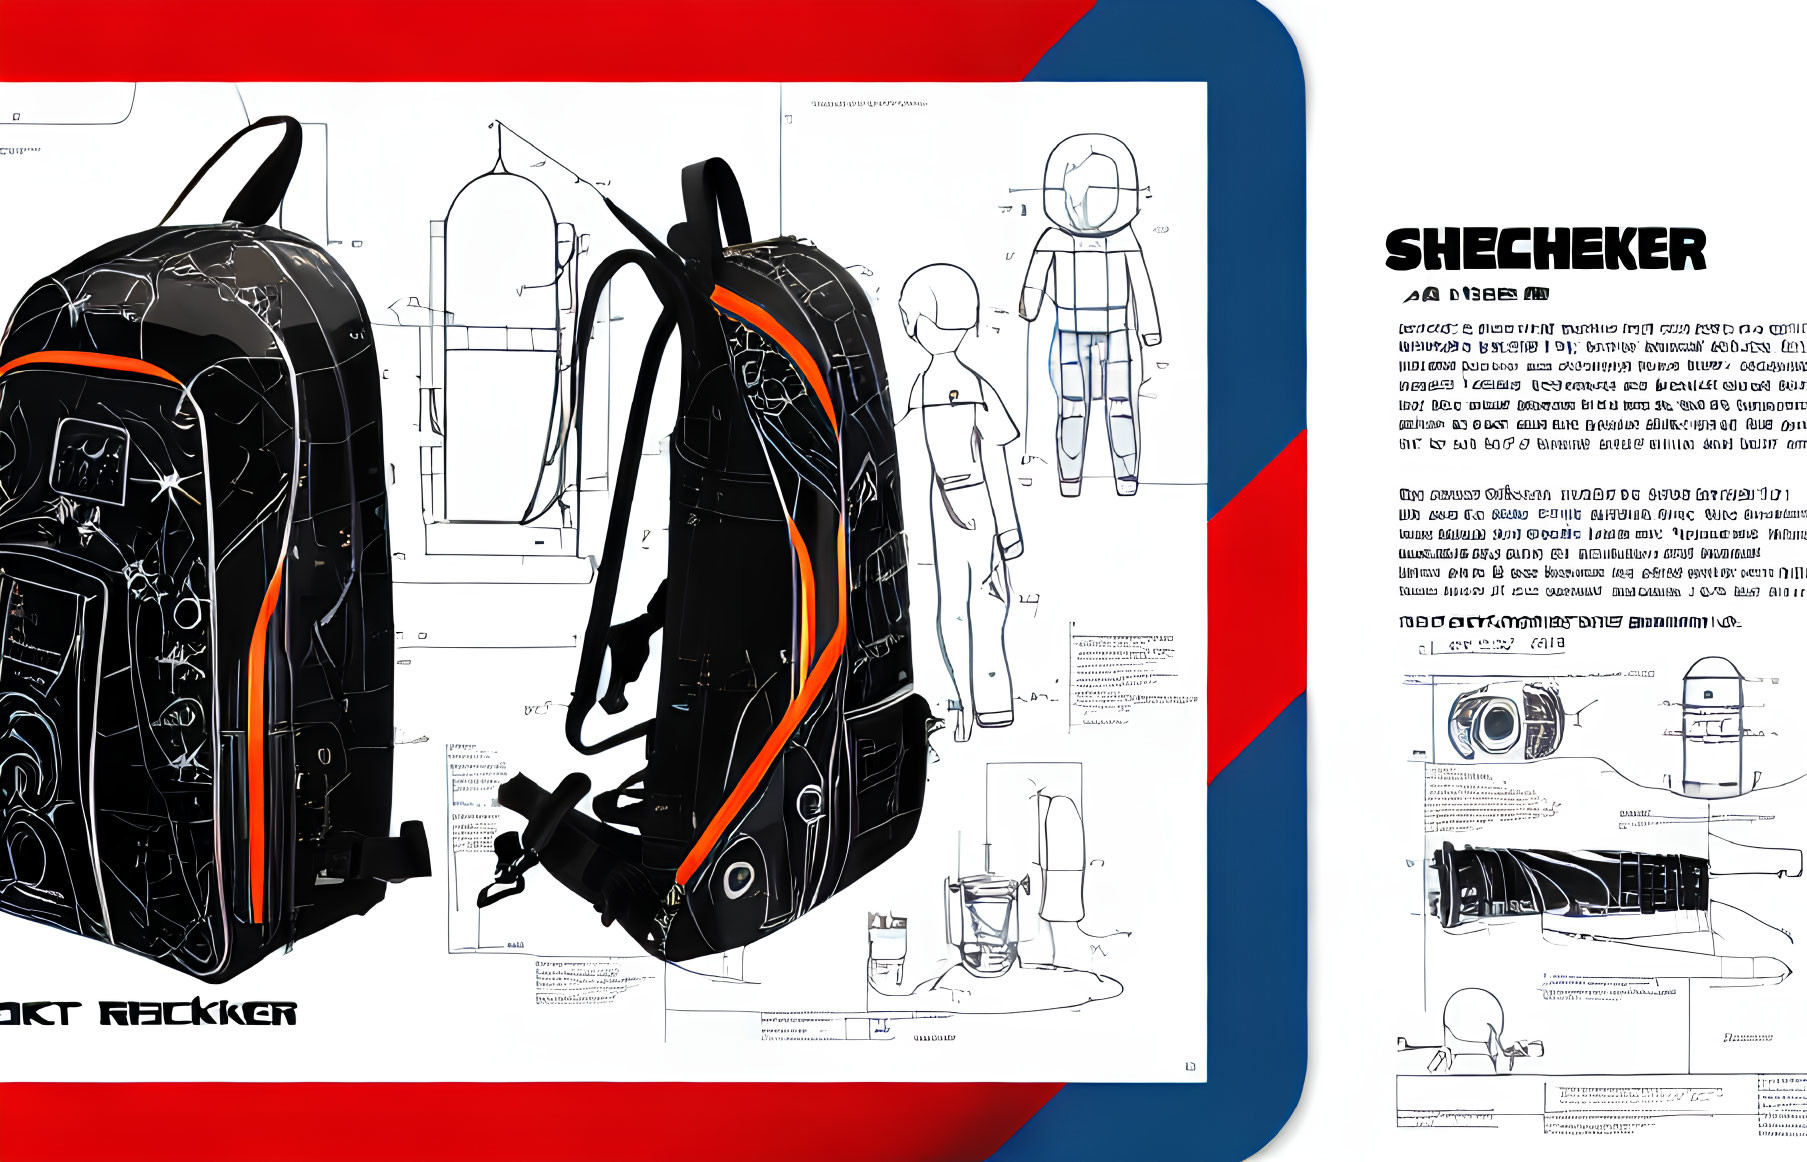 Black Backpack with Orange and White Designs and Schematic Illustrations